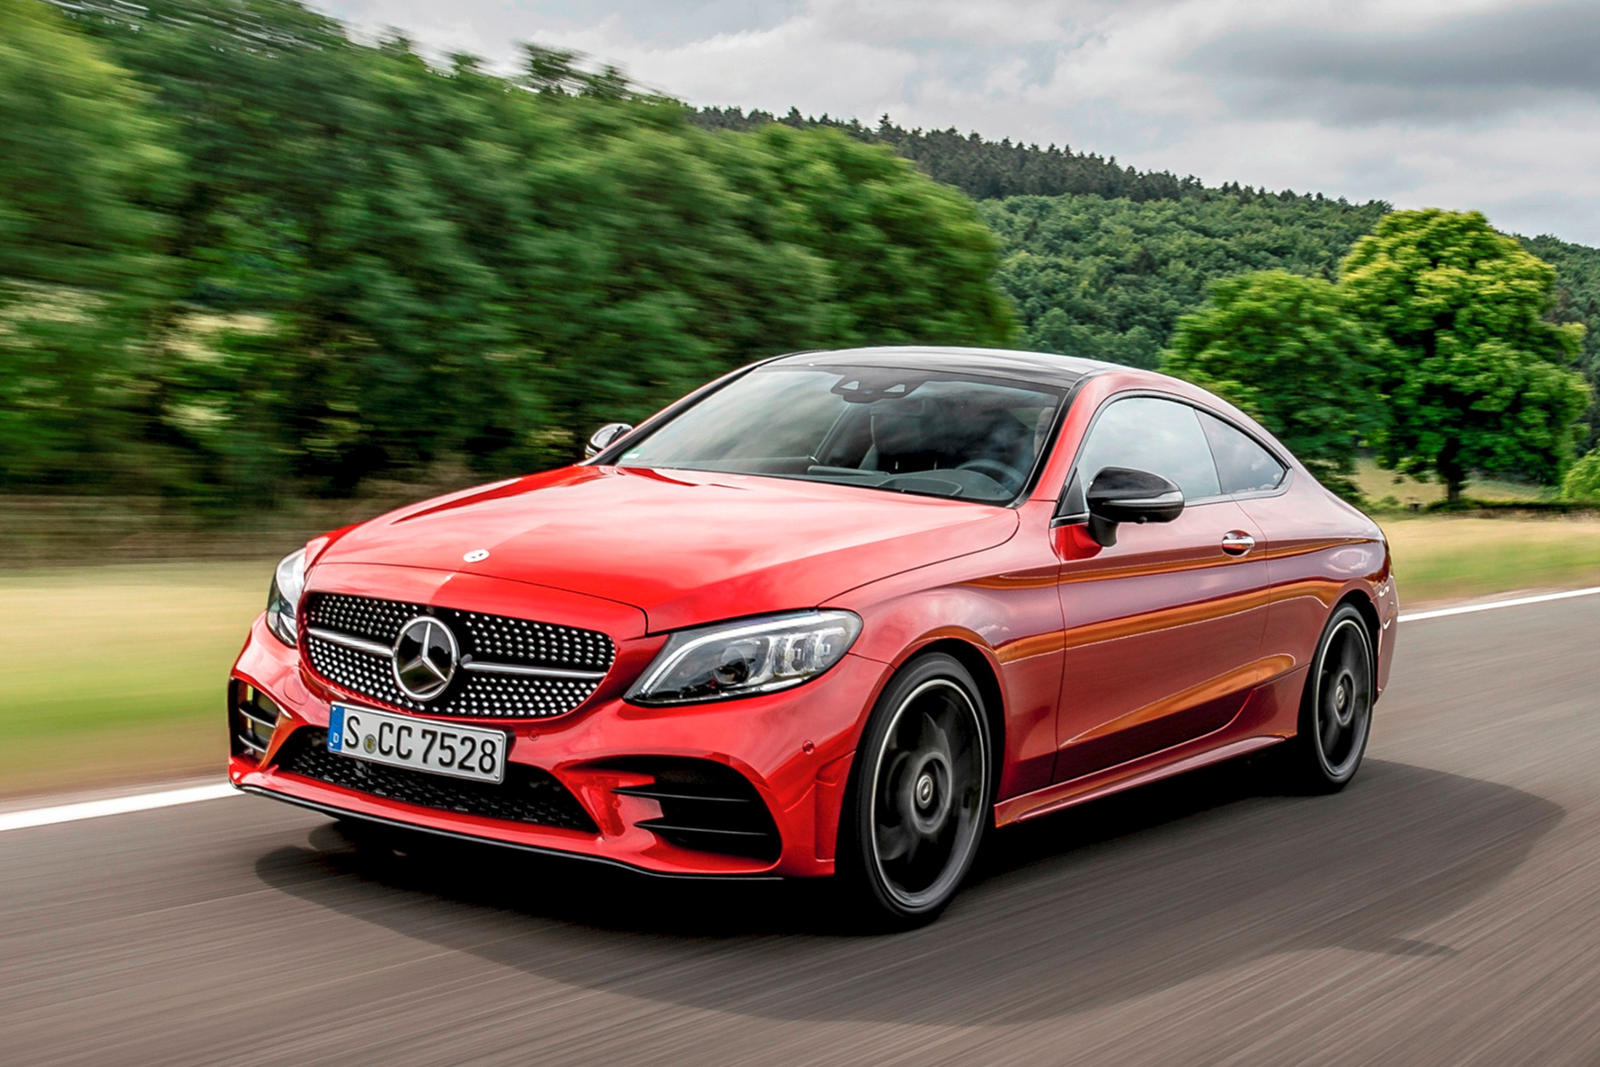 Used MercedesBenz CClass Coupe Red For Sale Near Me Check Photos And